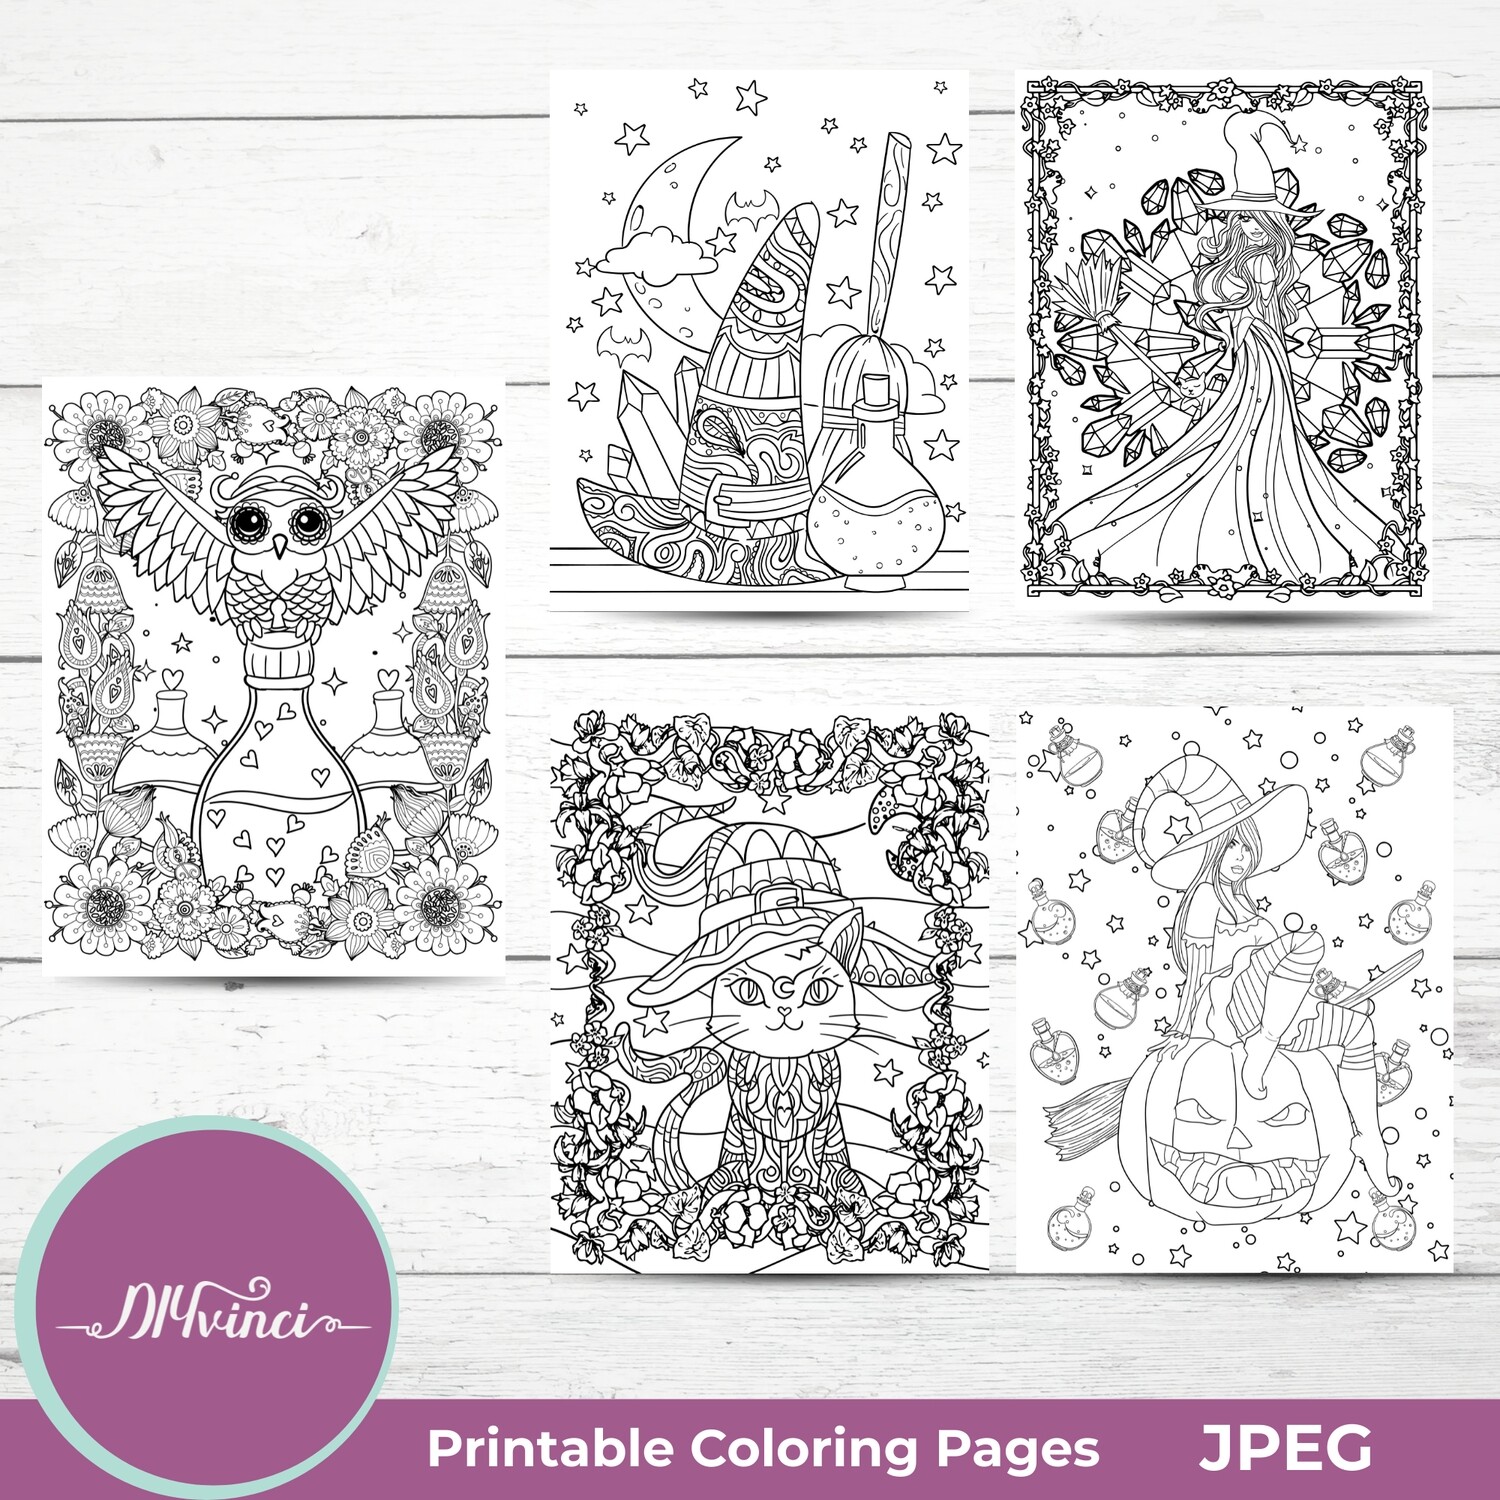 Printable Magical/Witch Coloring Pages - 5 JPEG - Personal & Commercial Use